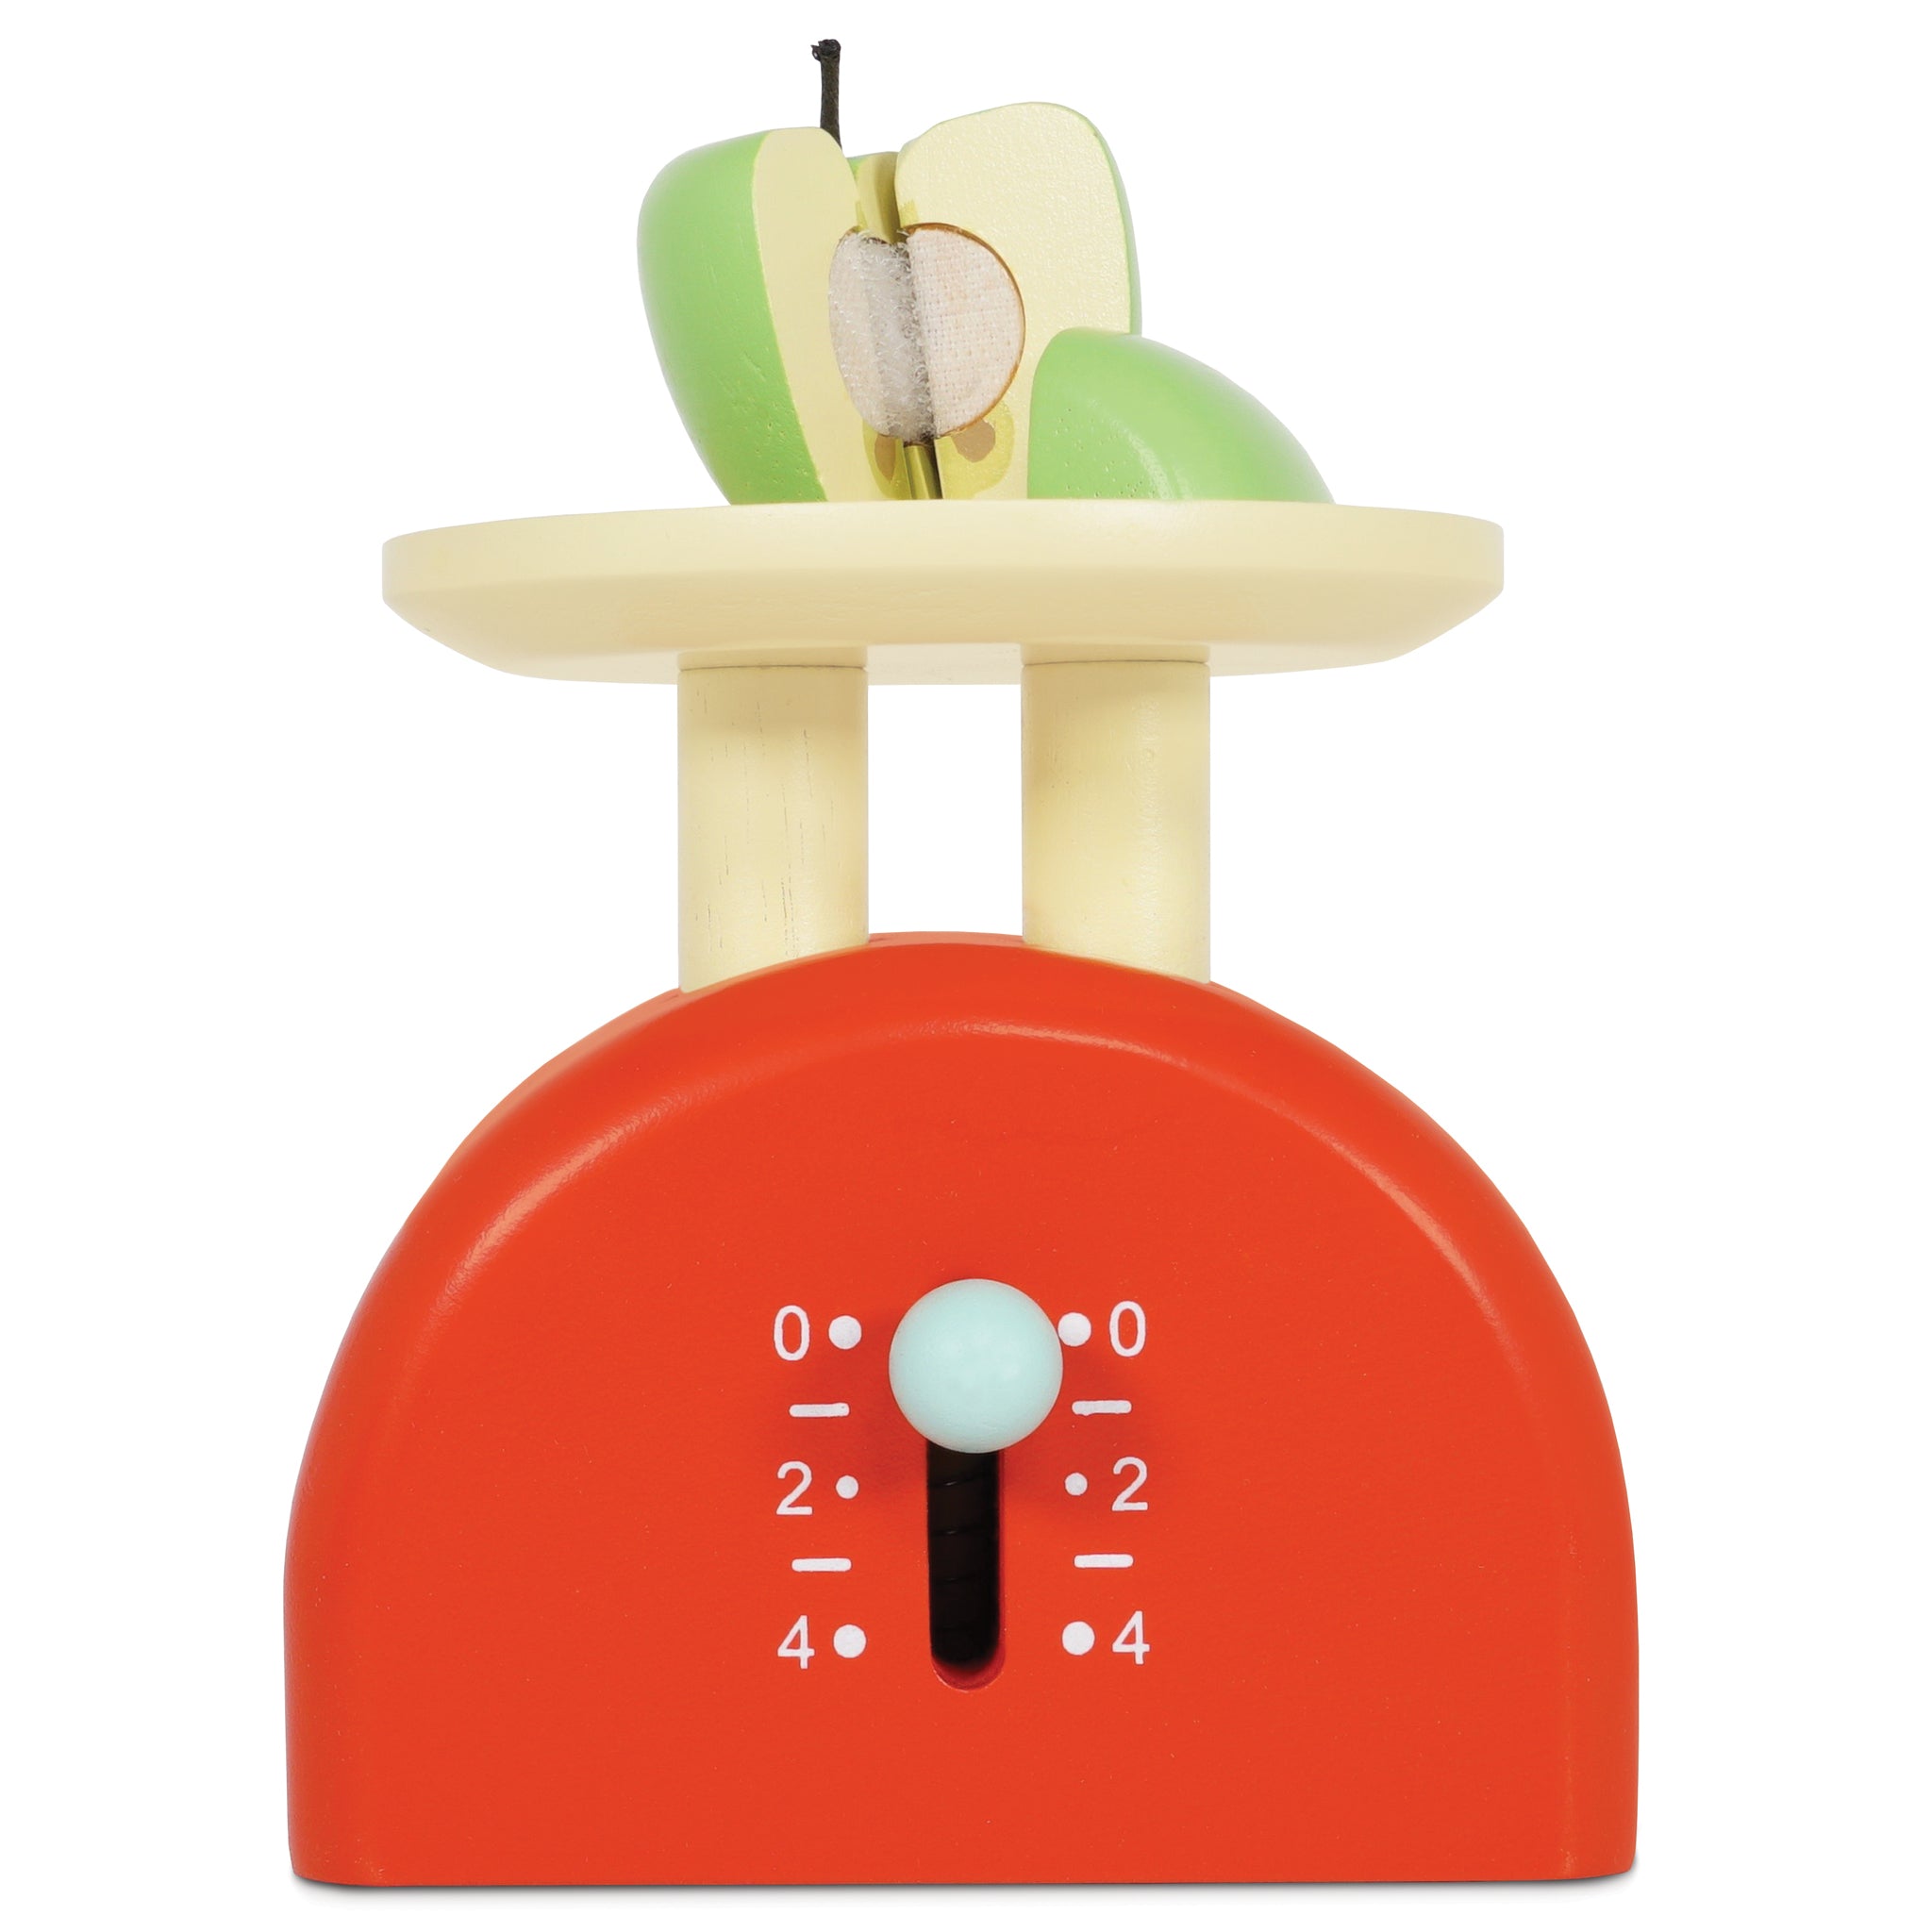 Kitchen Weighing Scales